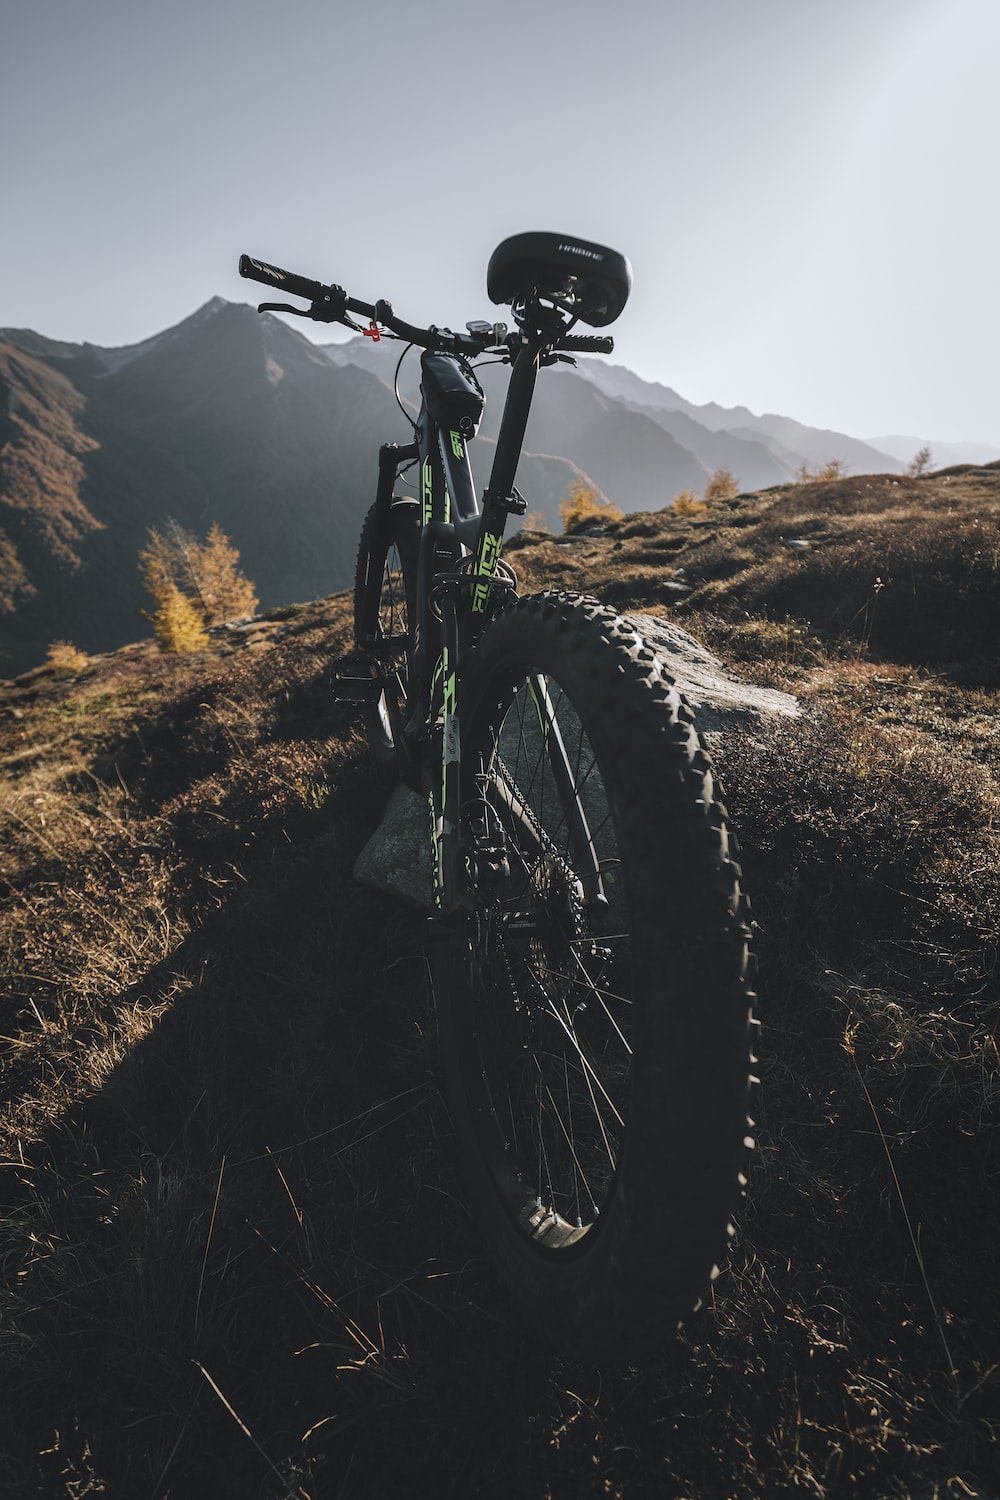 Mountain bike pictures download free images on